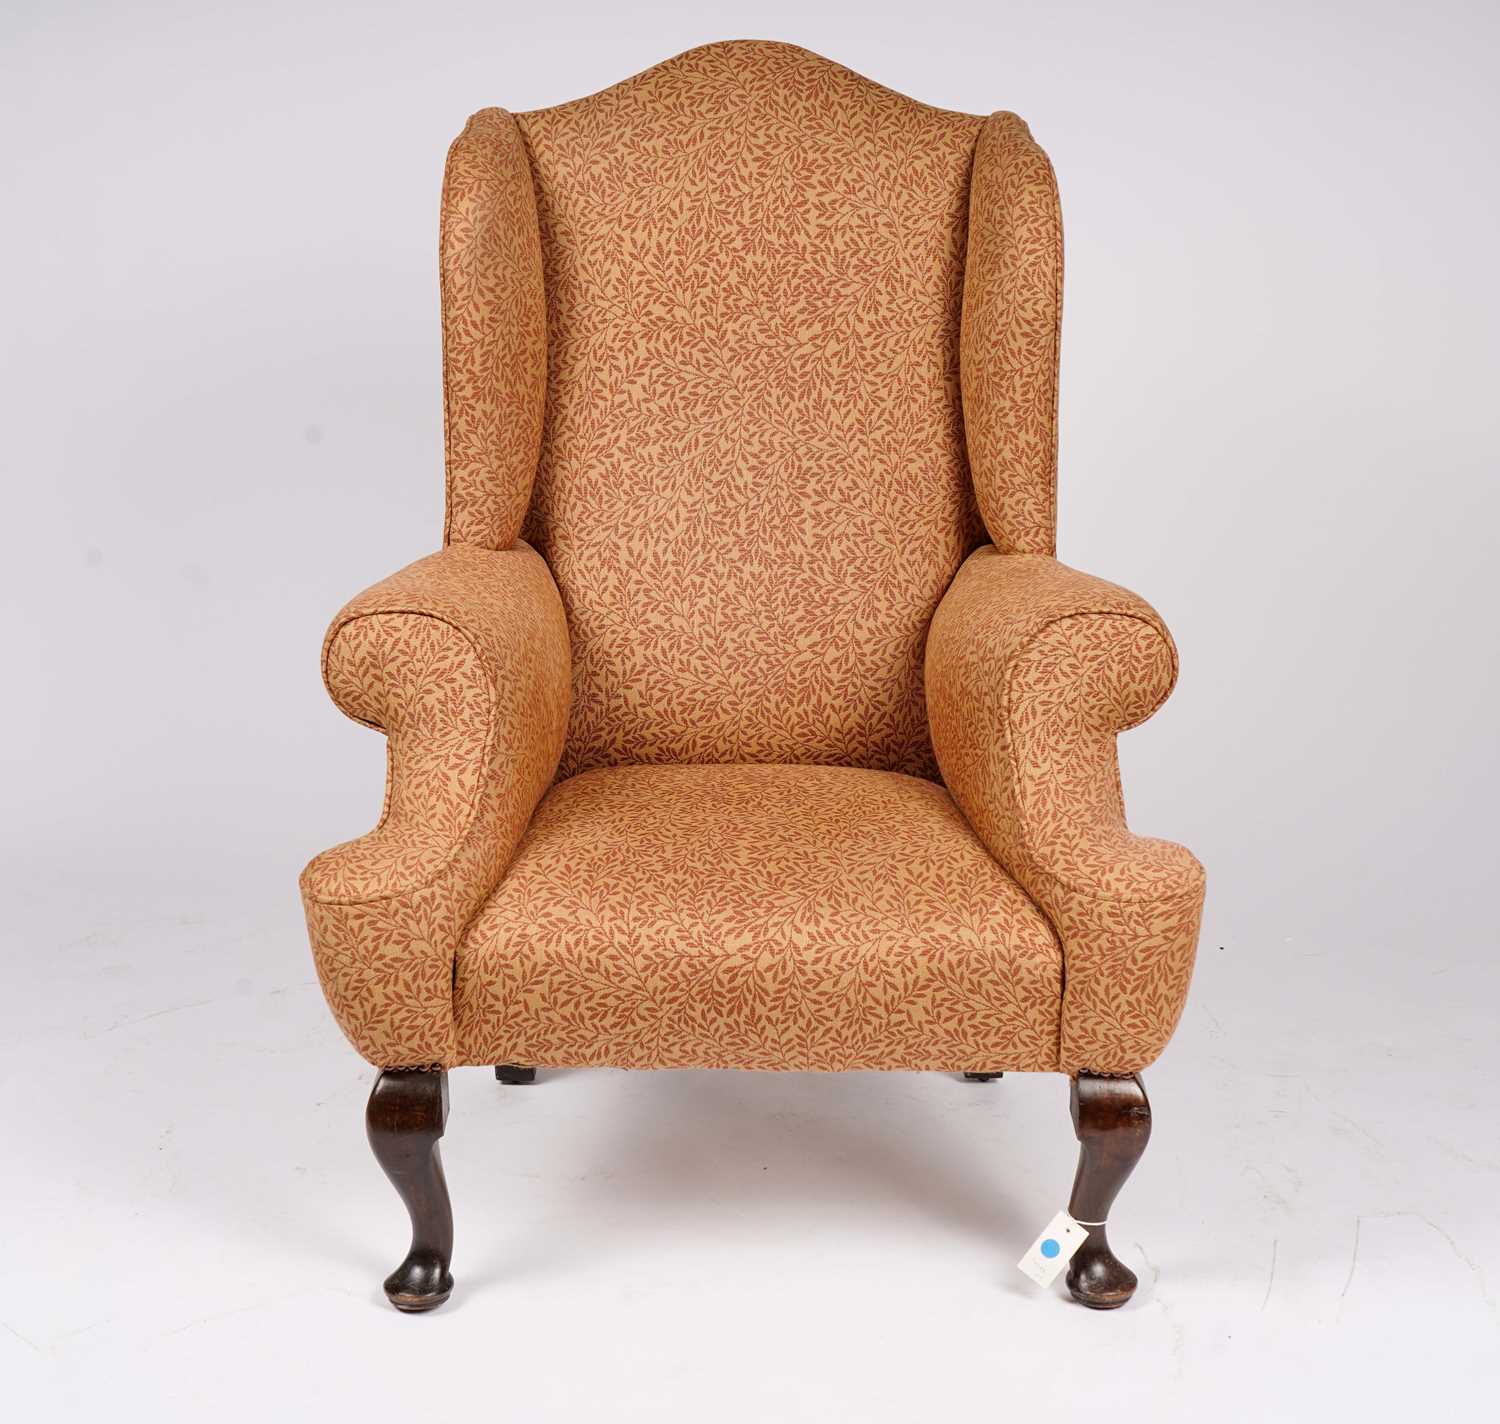 A wingback armchair in the early 18th Century taste - Image 3 of 6